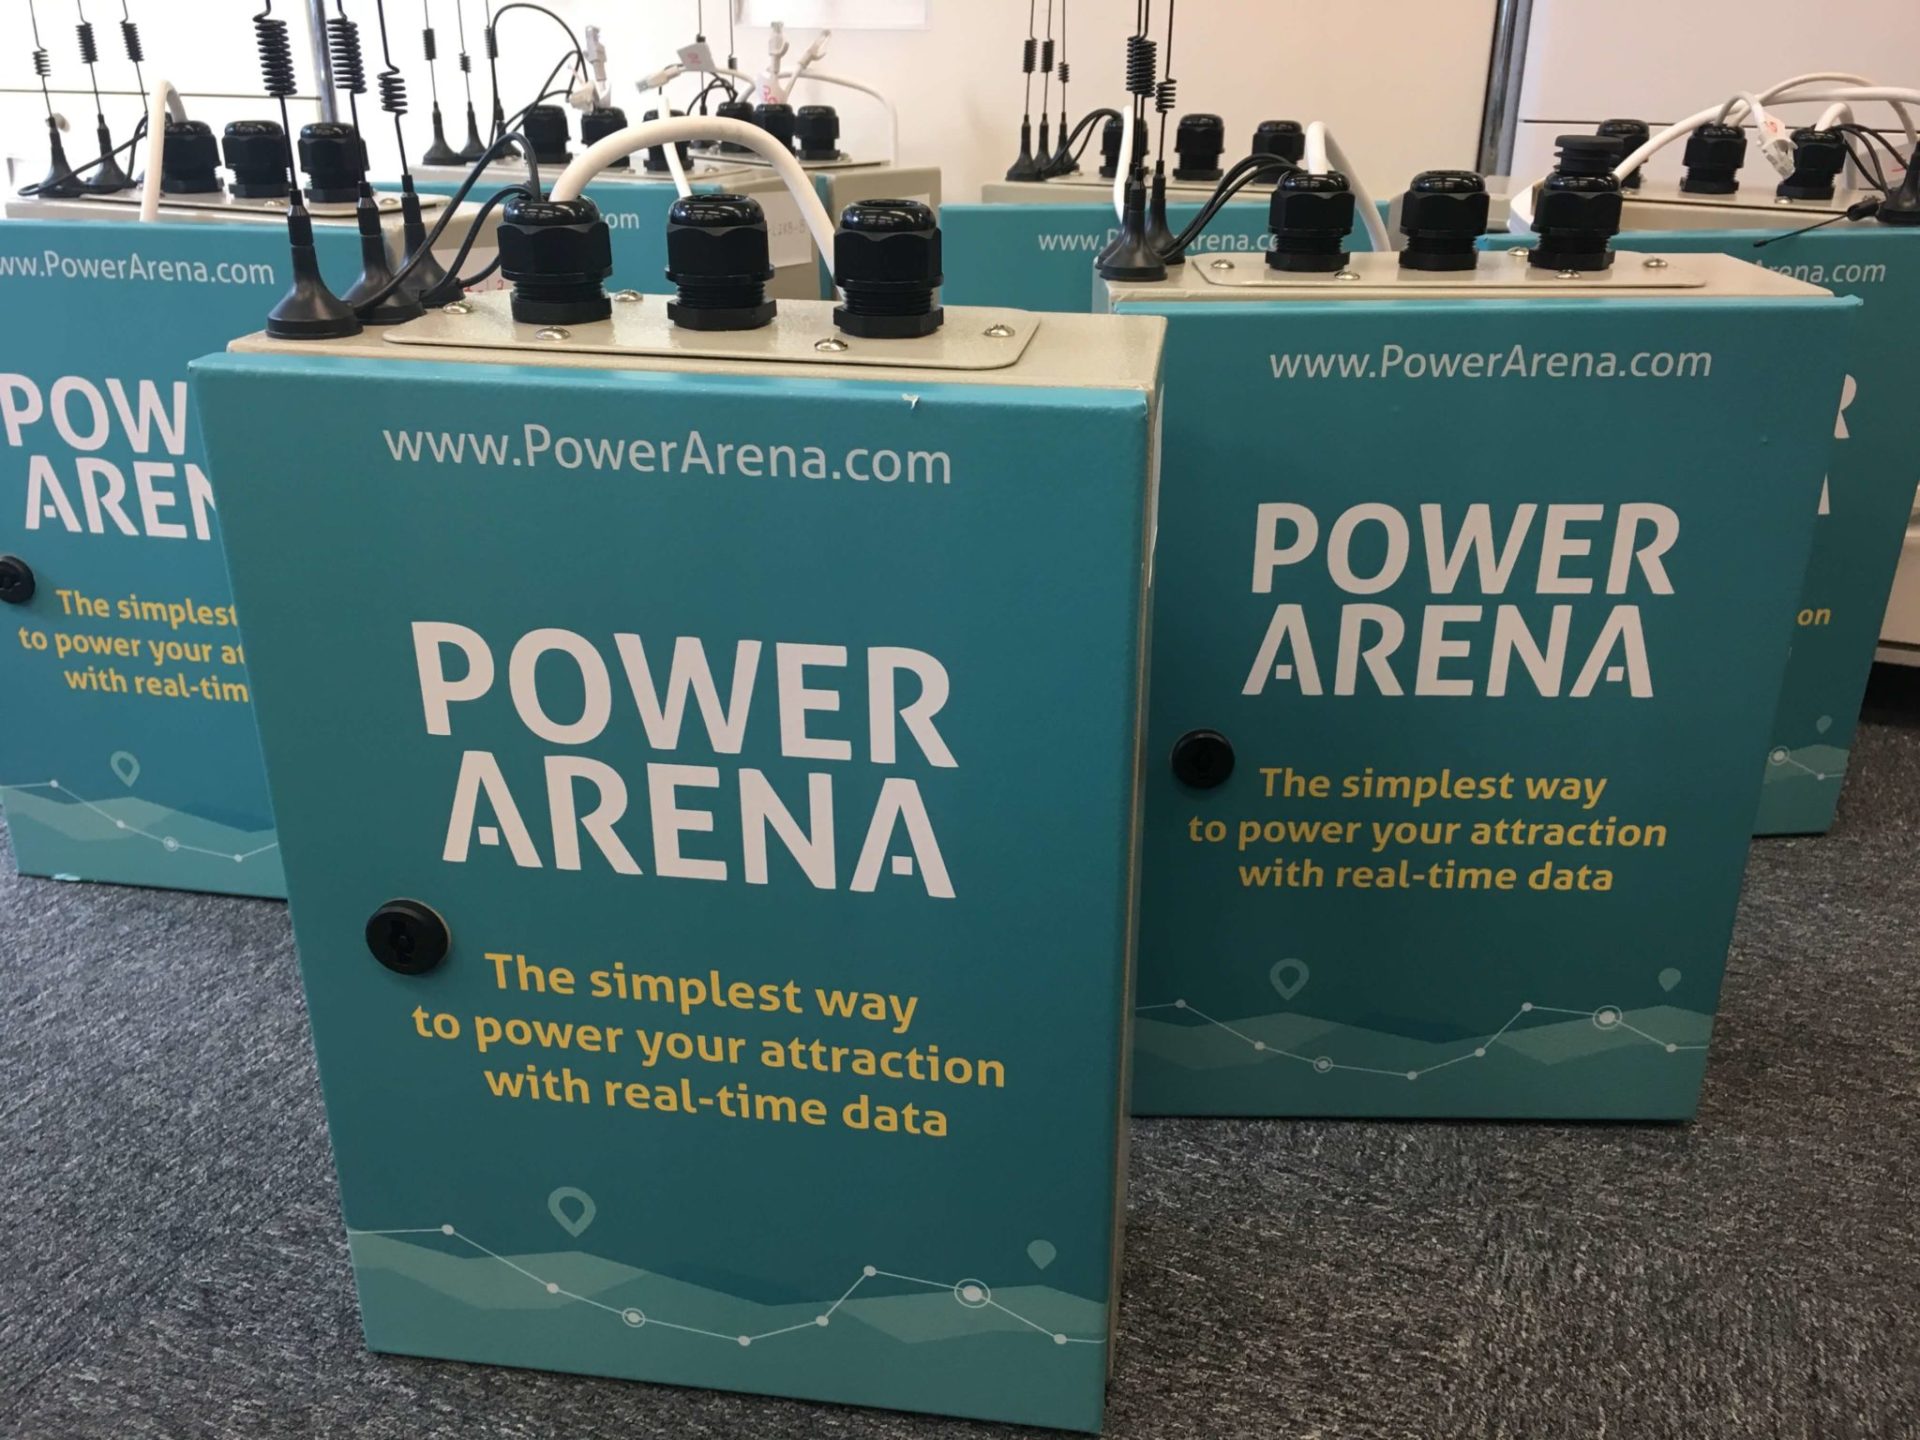 PowerArena empowers business results with smart technology